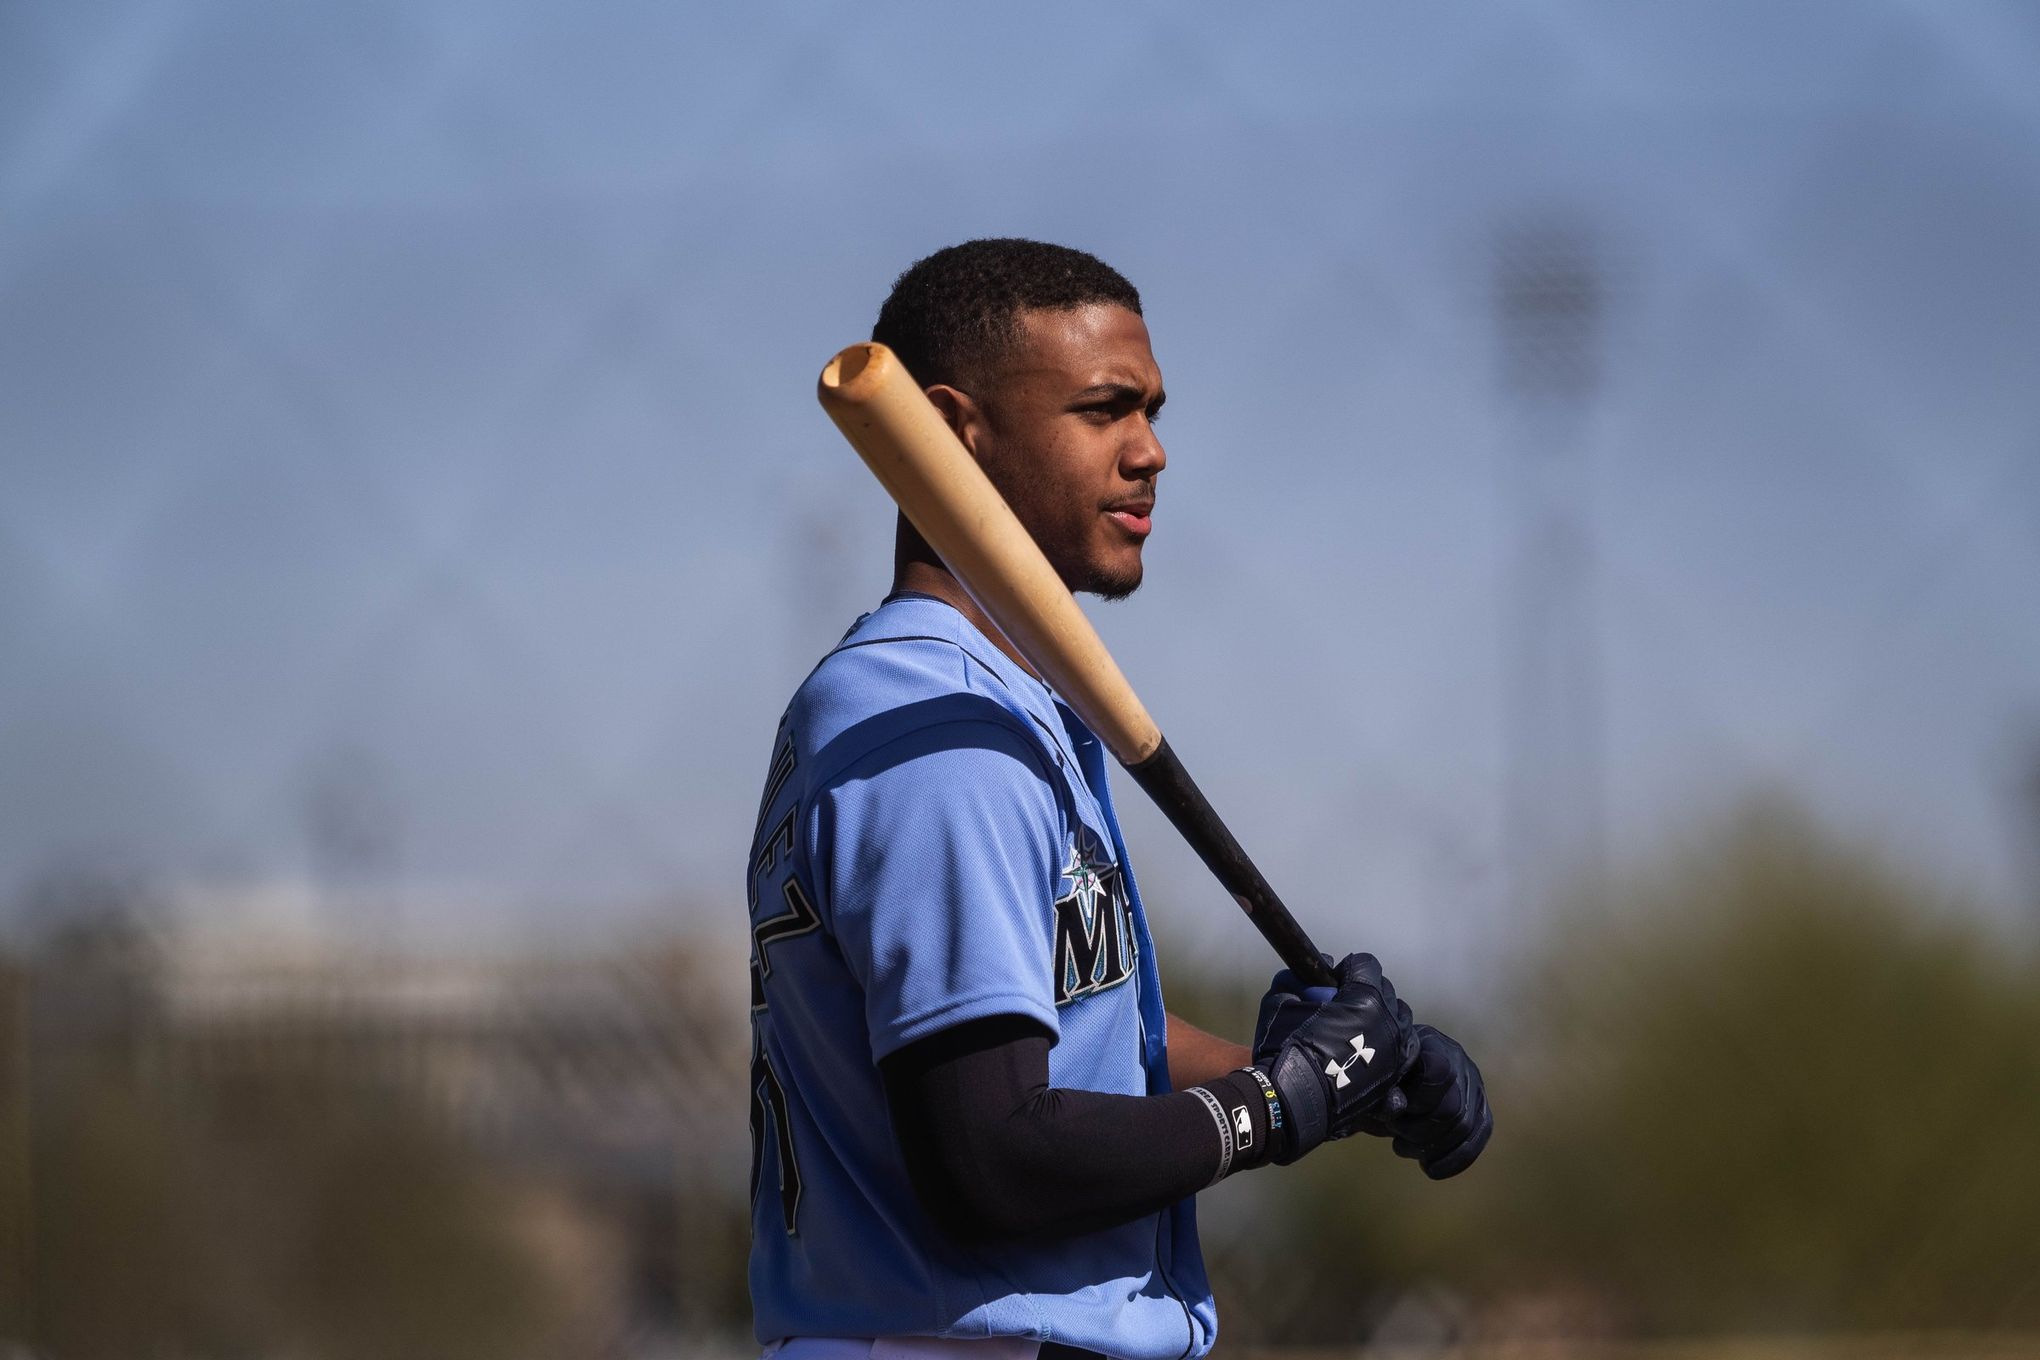 It's good to be Julio Rodriguez: Top Mariners prospect earns